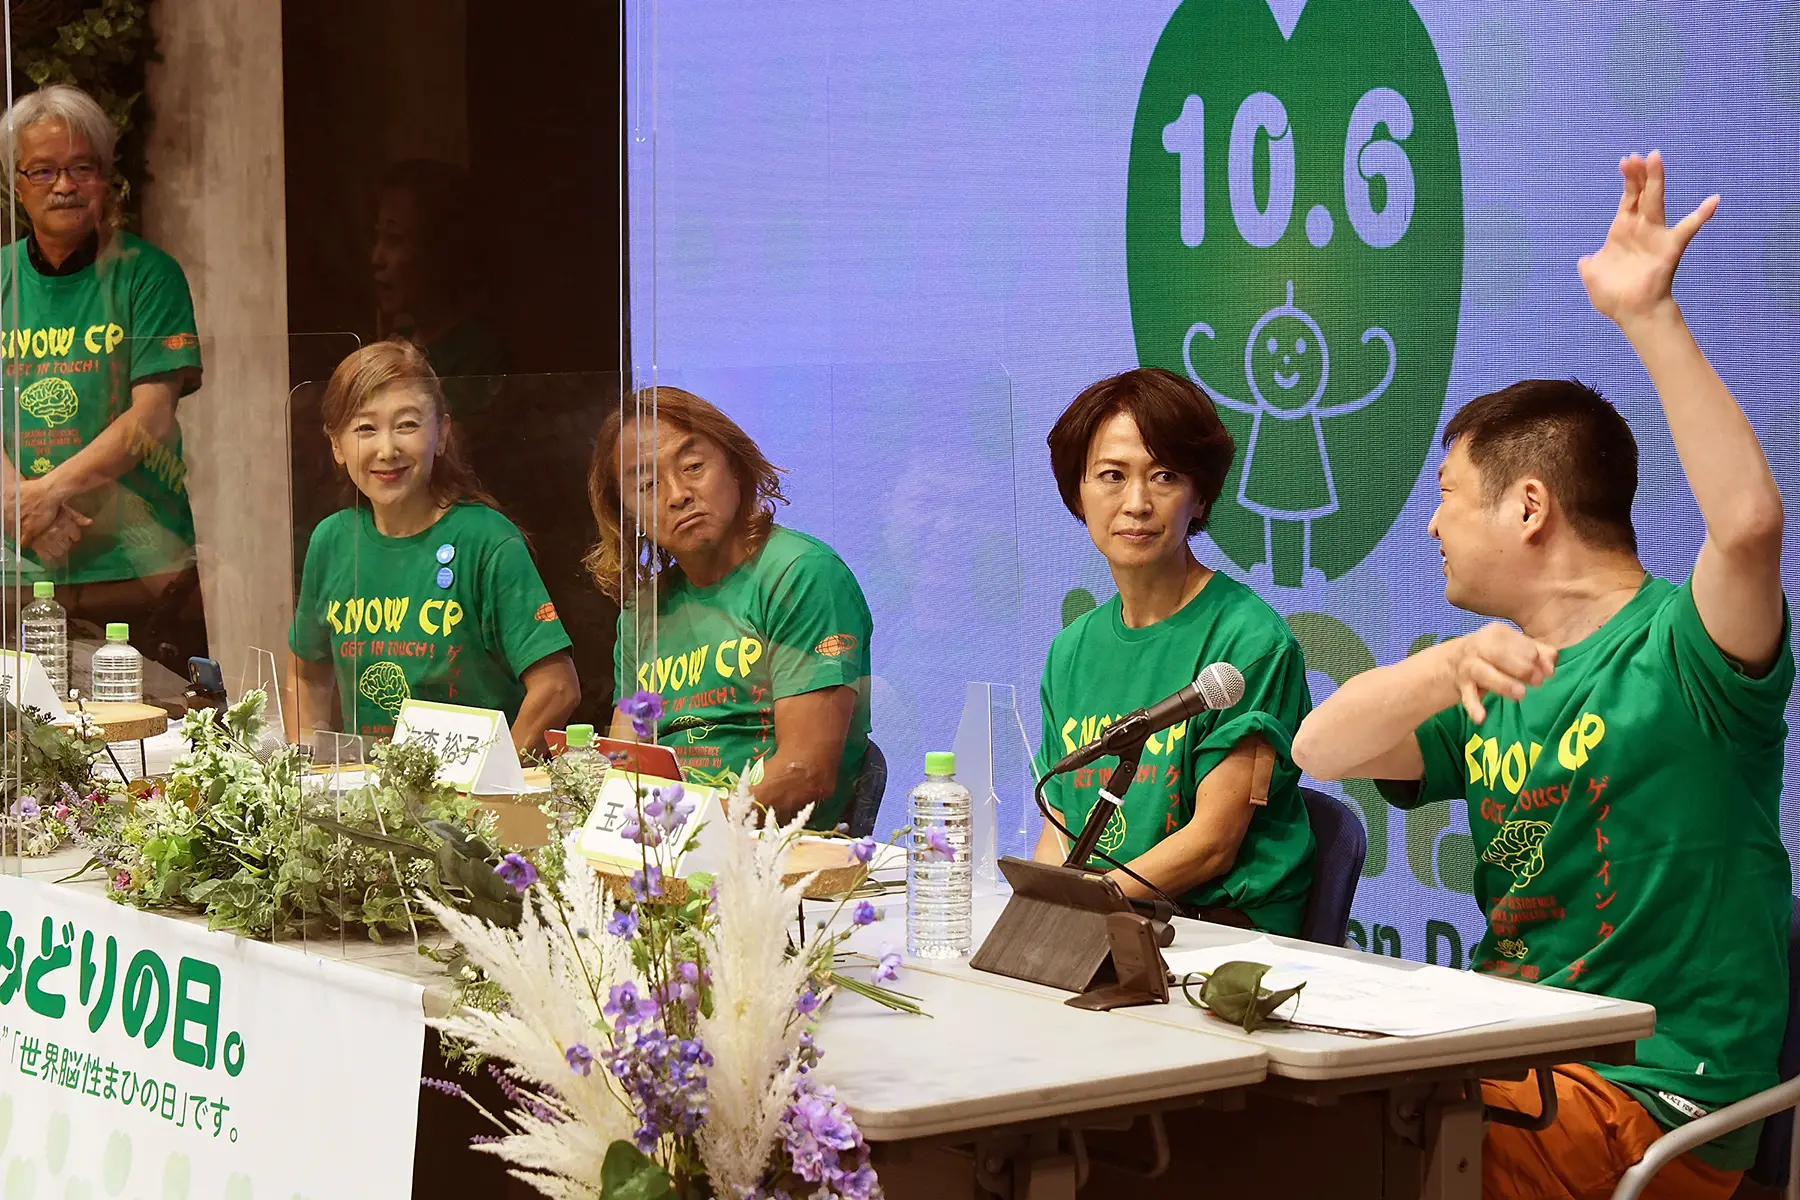 Members of NPO Get In Touch at a press conference. Panel are wearing green t-shirts